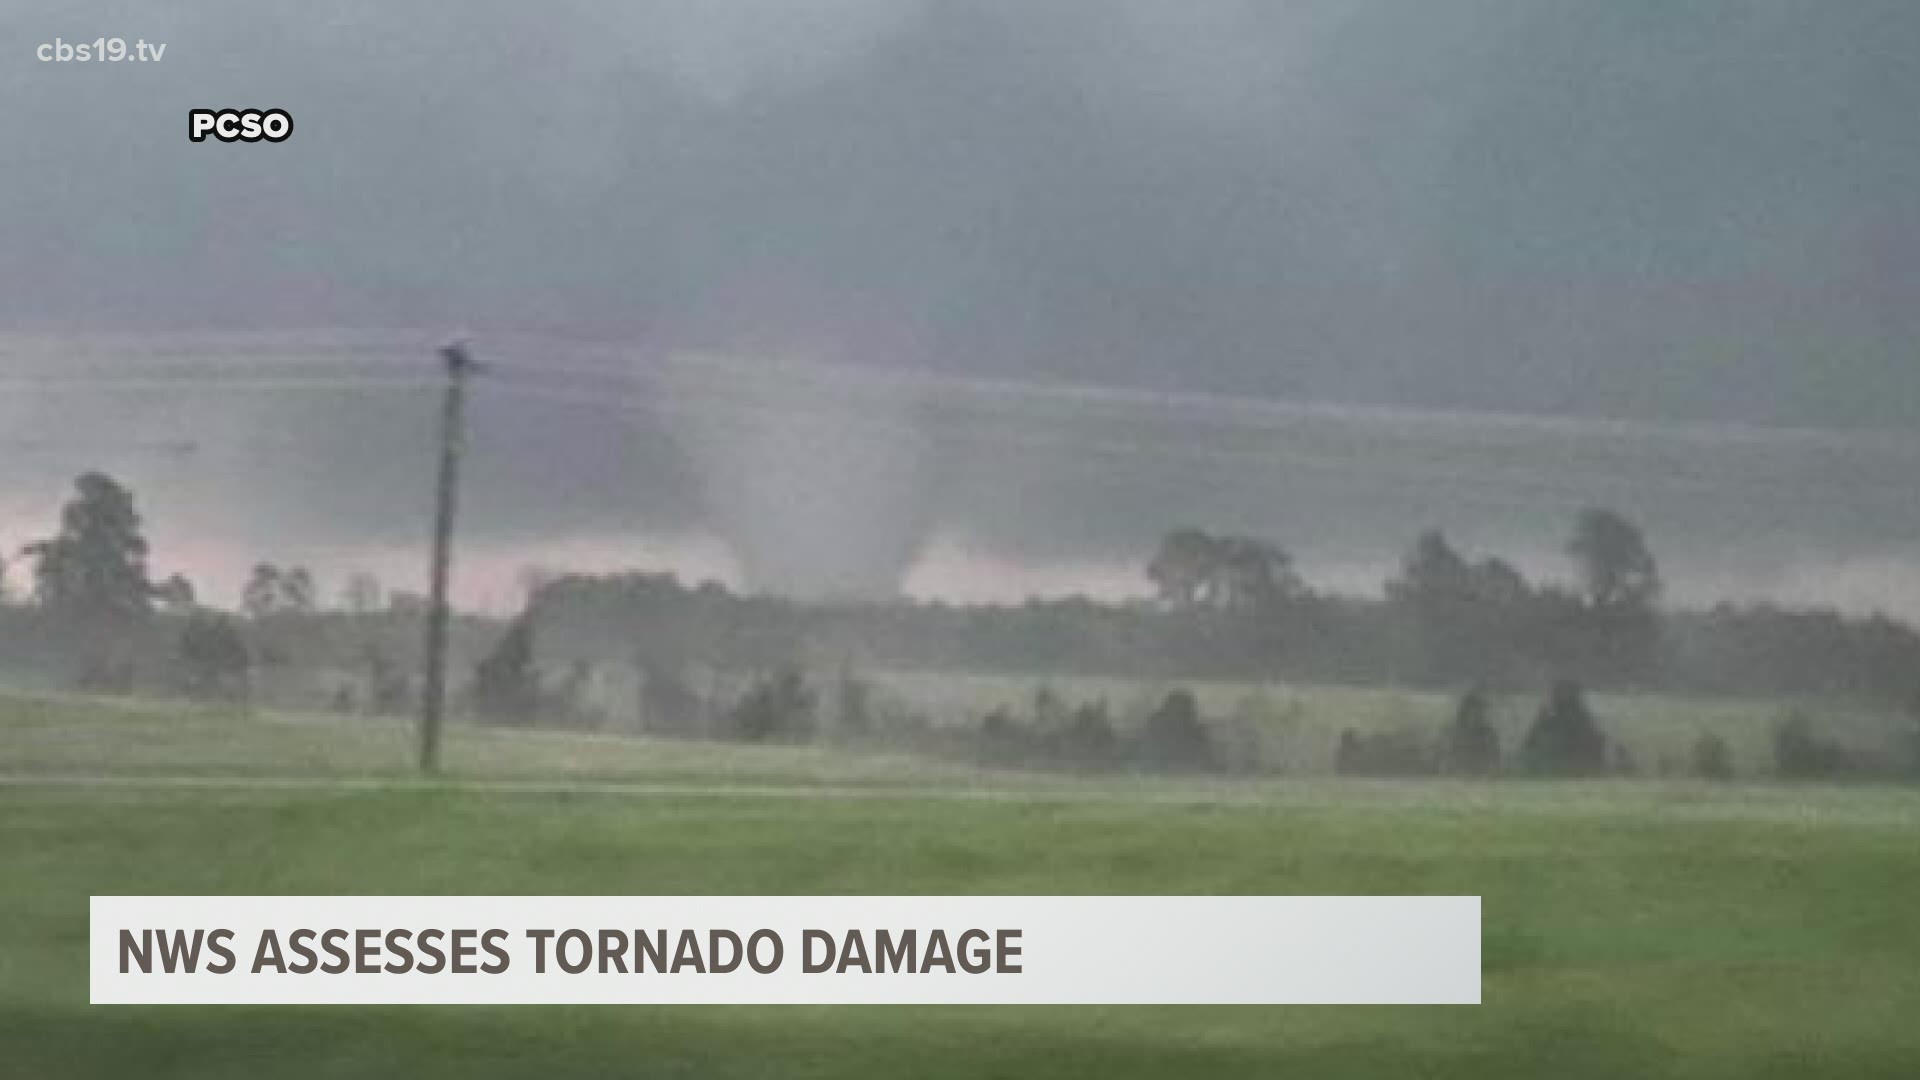 3 tornadoes touched down in East Texas on Saturday, NWS says cbs19.tv